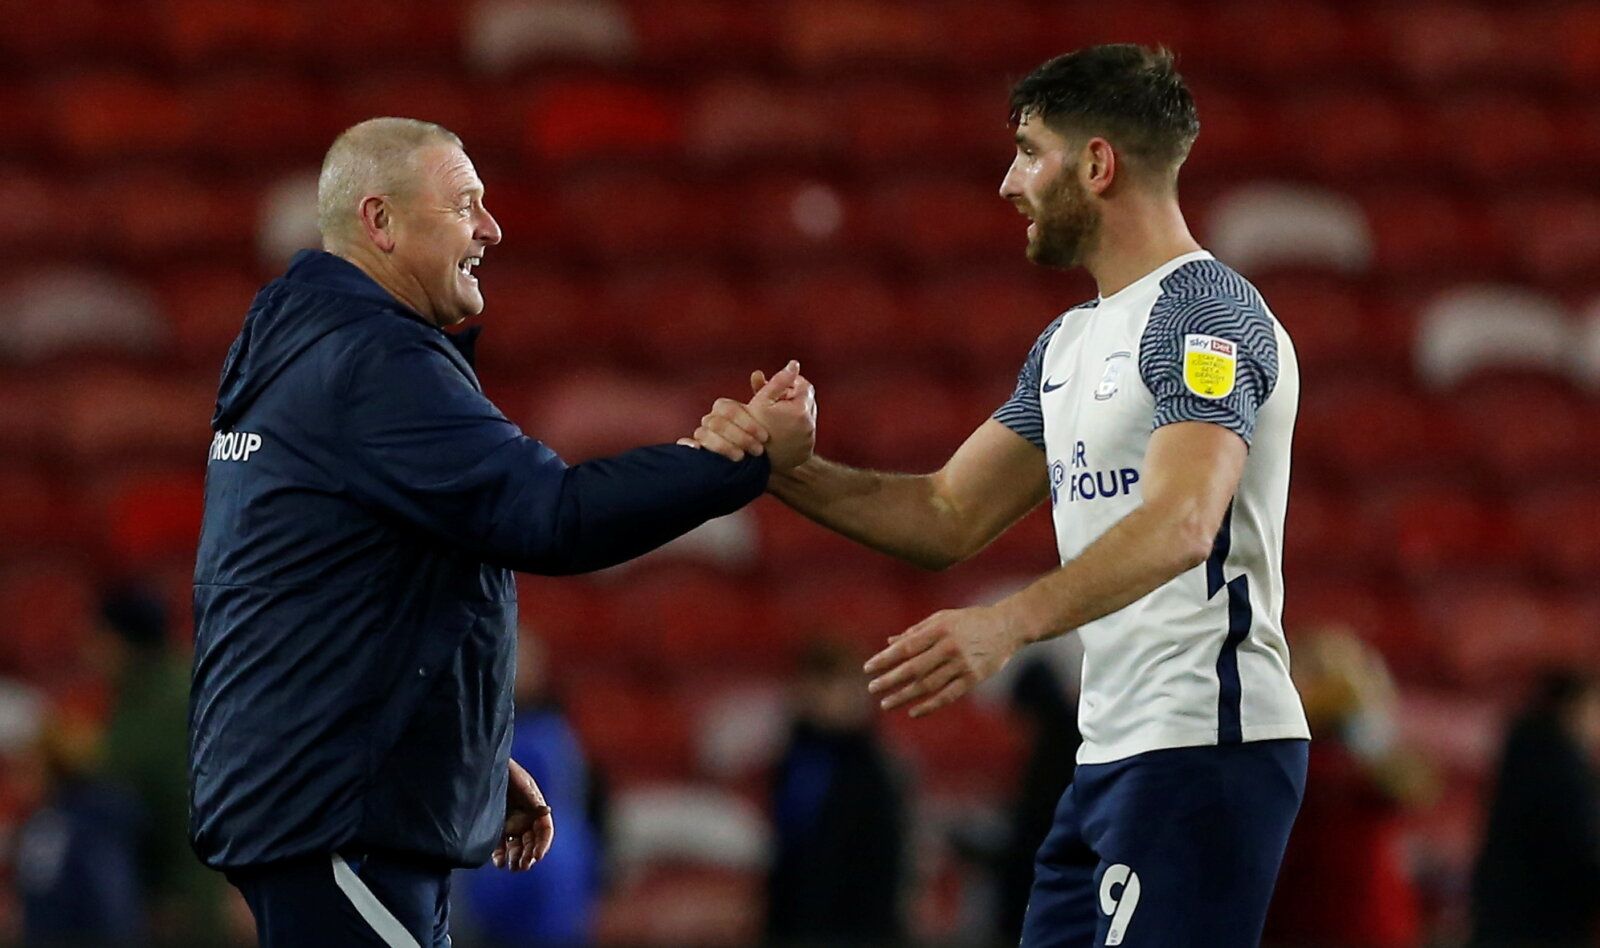 Soccer Football - Championship - Middlesbrough v Preston North End - Riverside Stadium, Middlesbrough, Britain - November 23, 2021 Preston North End manager Frankie McAvoy shakes hands with Ched Evans after the match  Action Images/Craig Brough